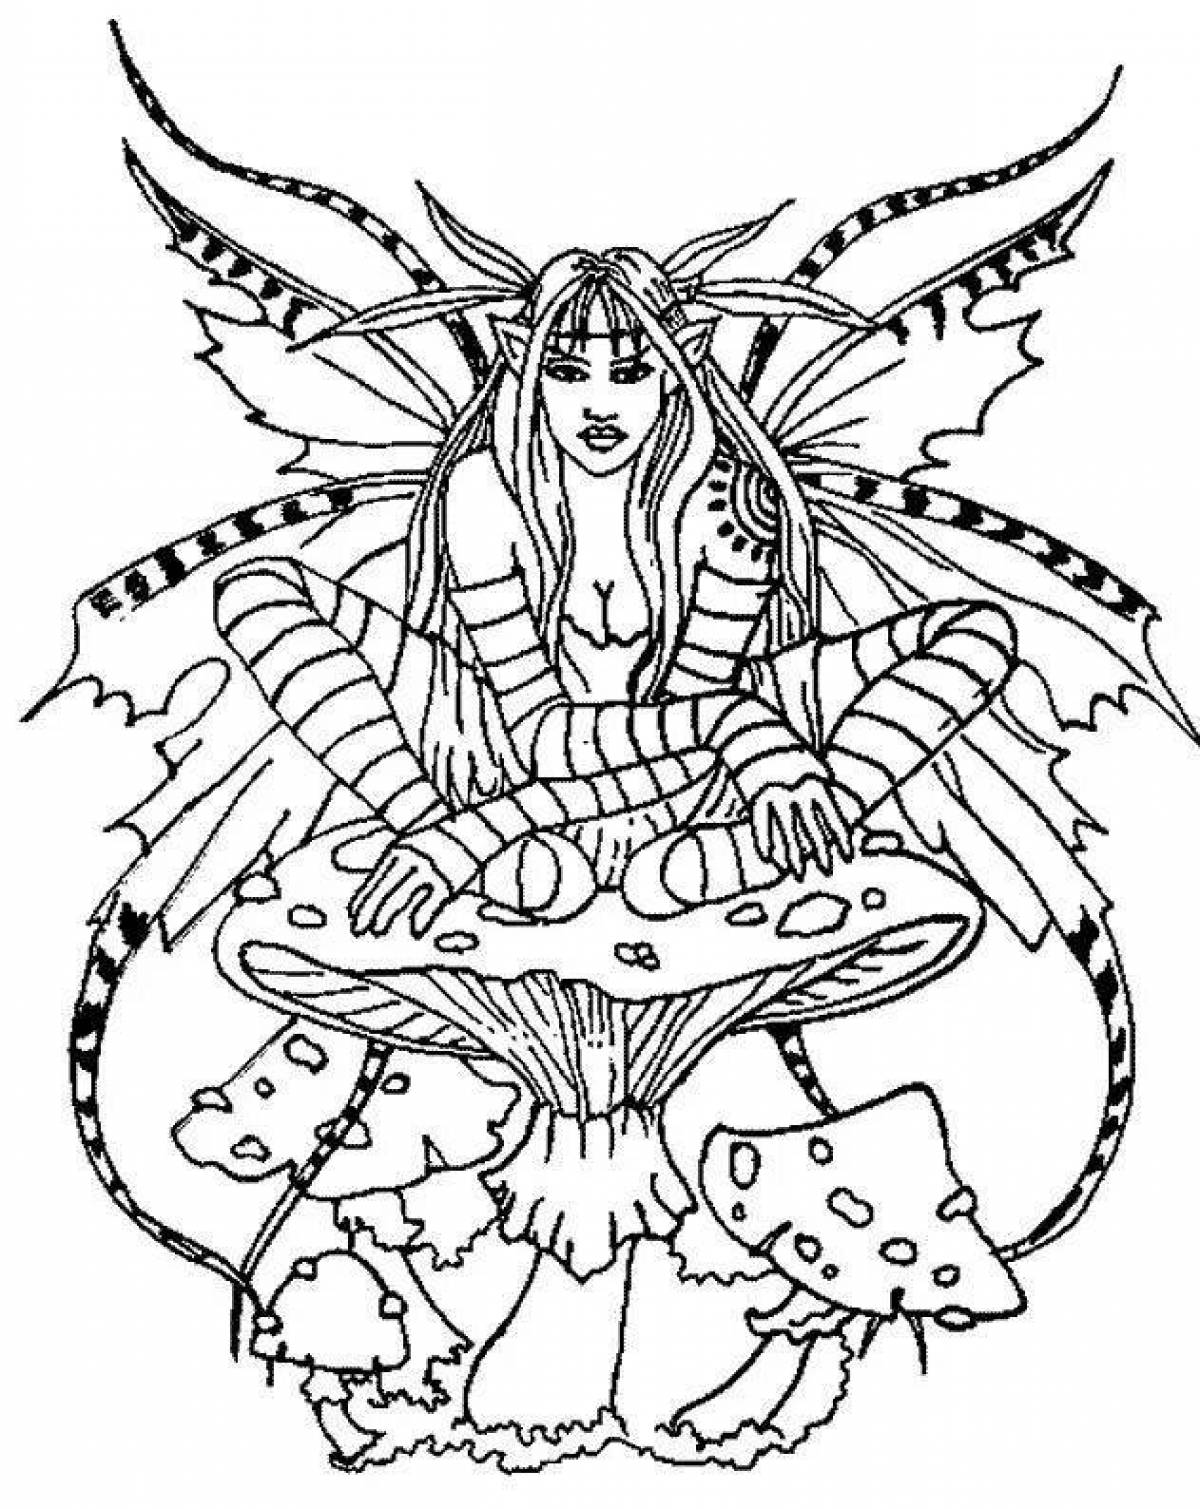 Coloring page scary but beautiful: terribly beautiful